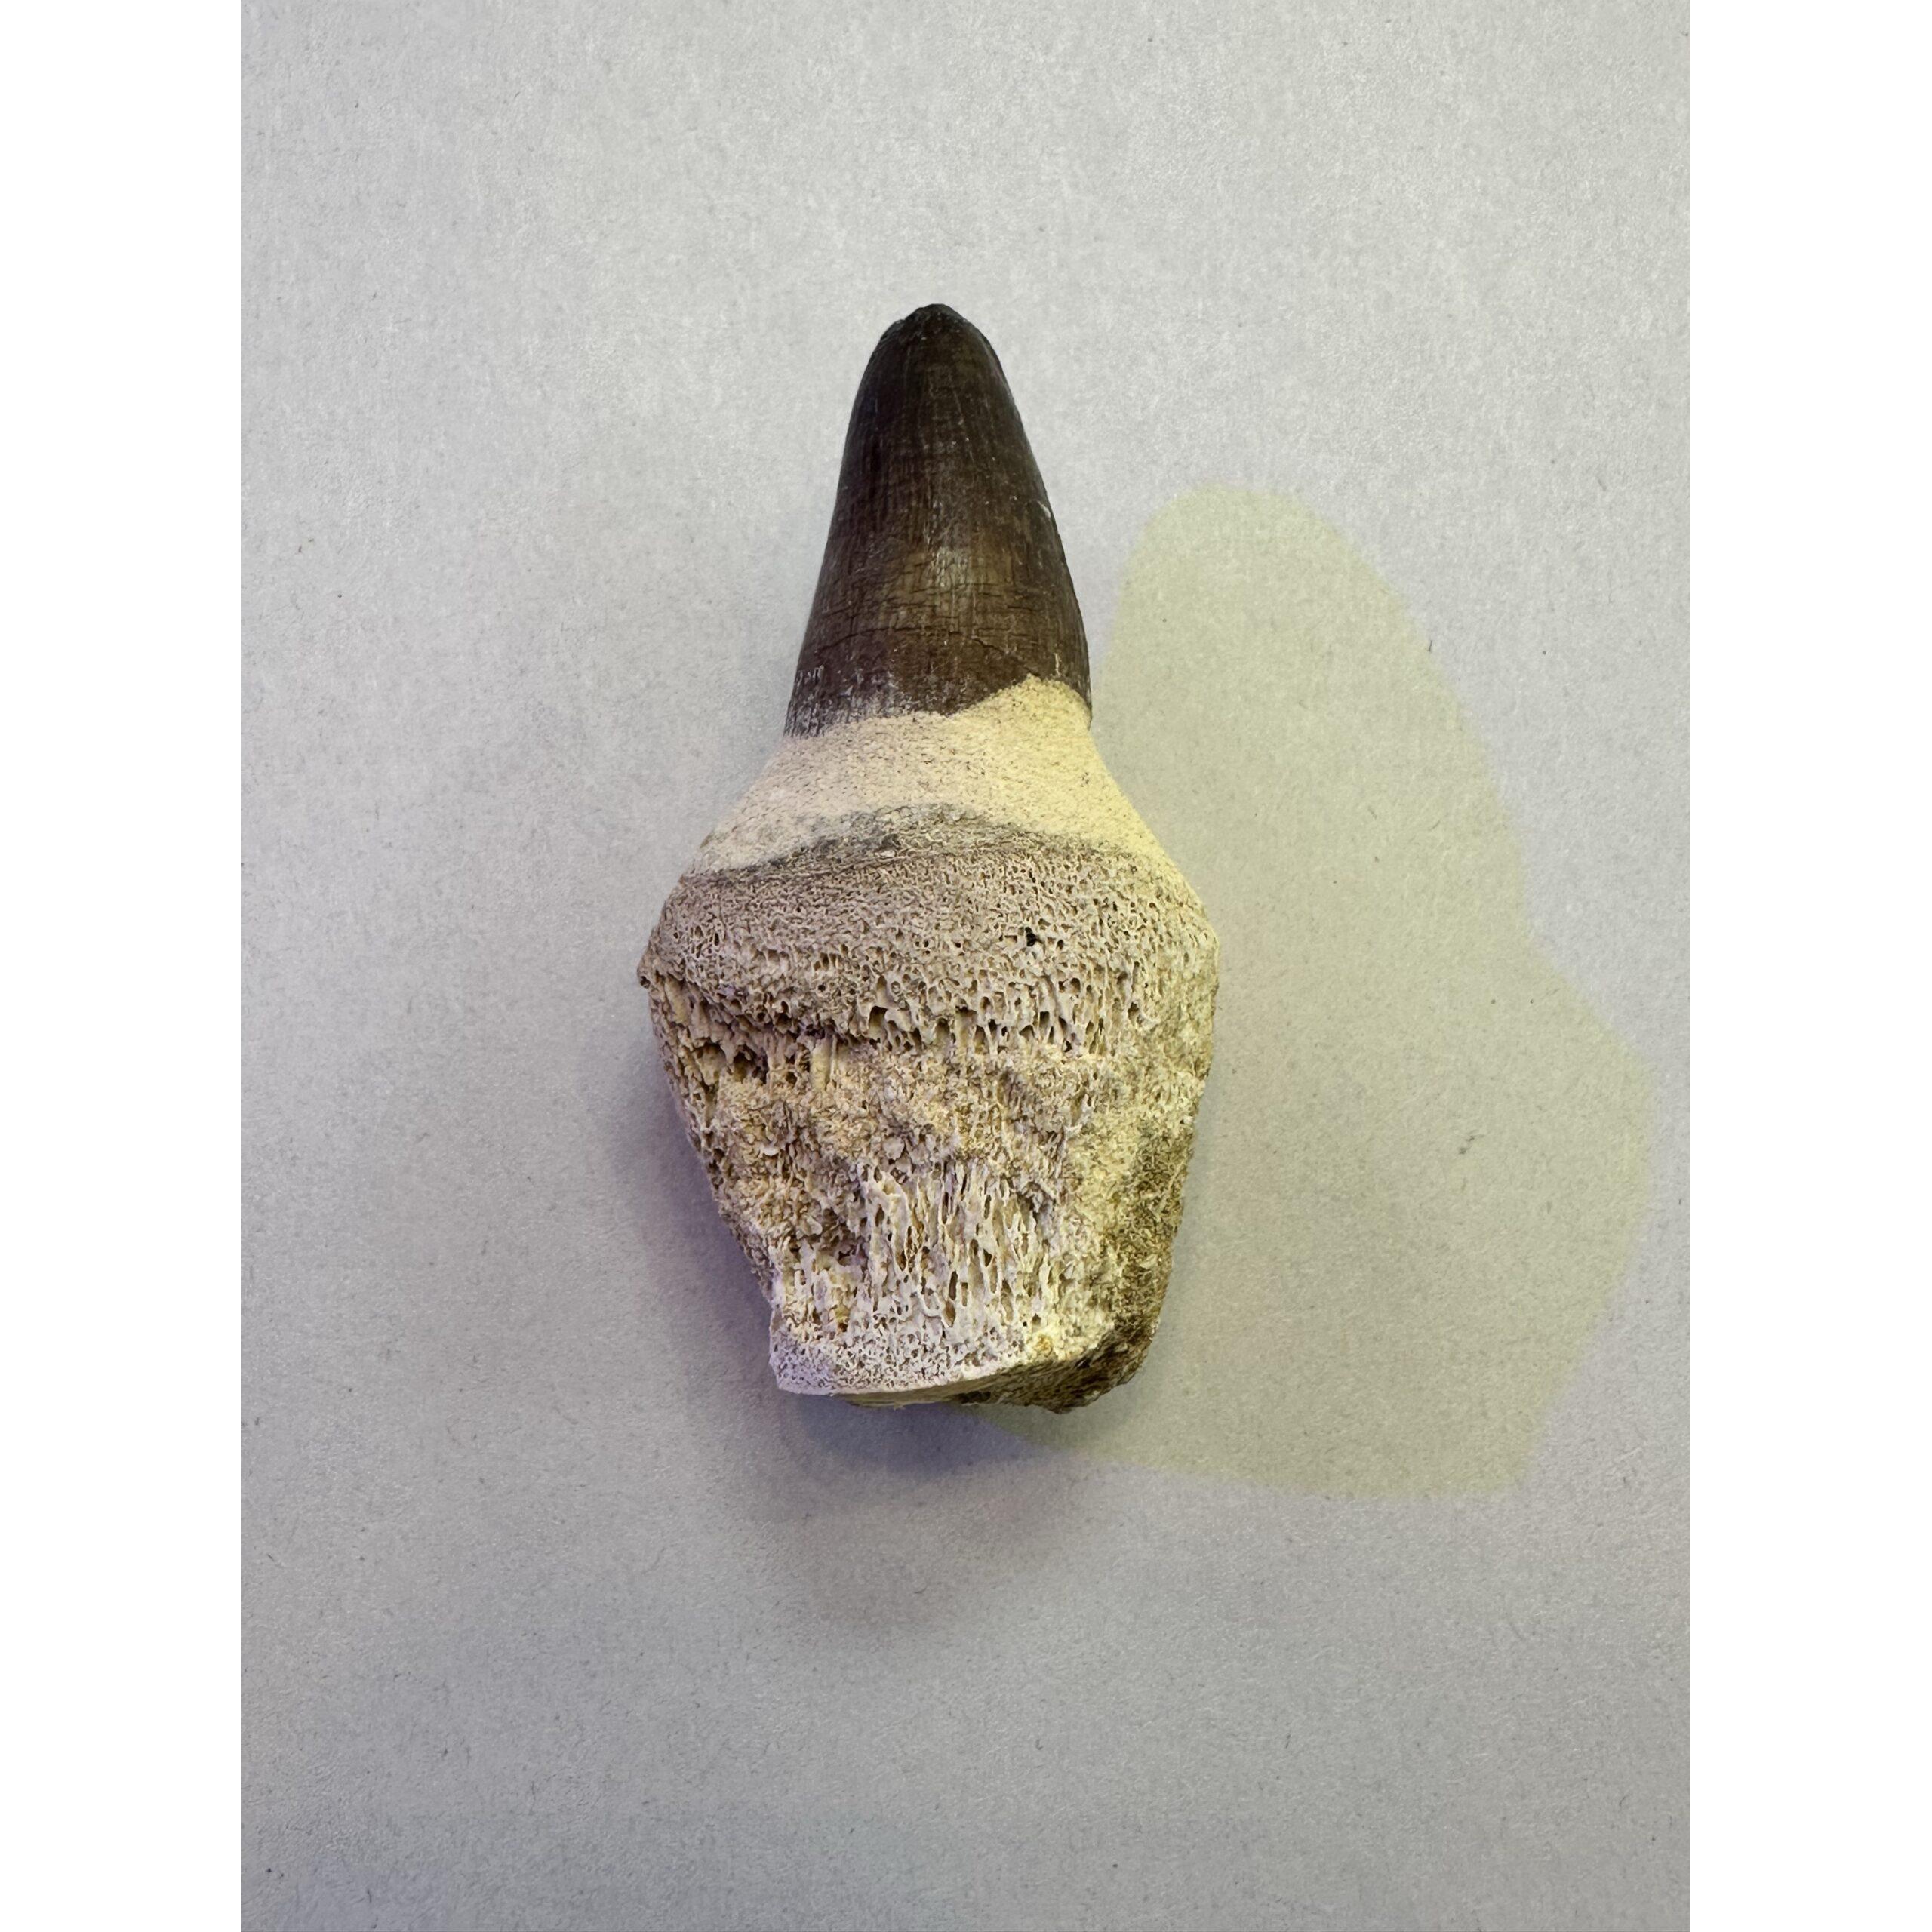 Mosasaurus tooth with root, great 2 7/8 inch fossil Prehistoric Online